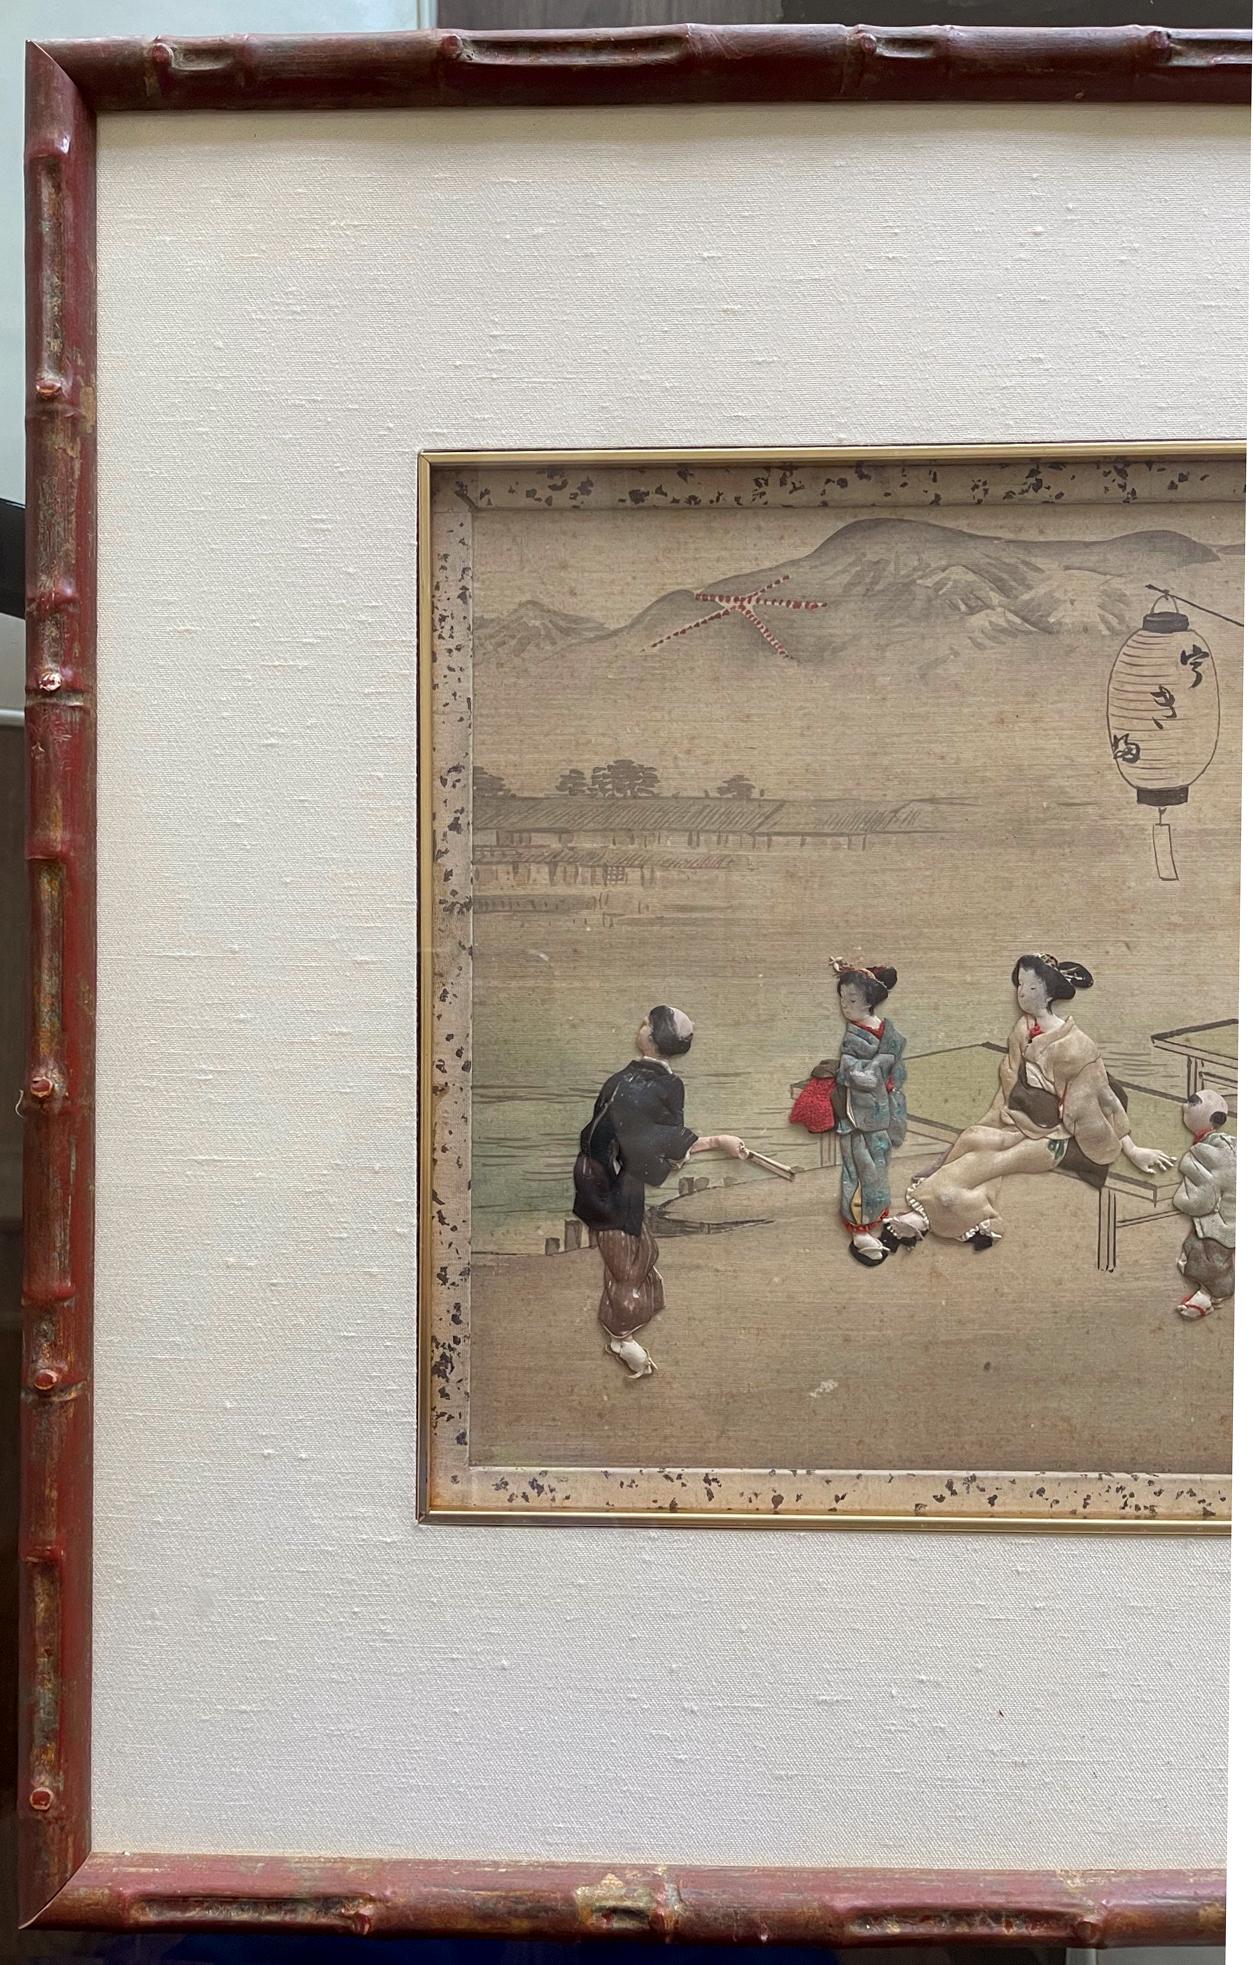 On offer is one of the set of seven framed Japanese textile art called Oshi-E circa Meiji Period (1868-1912). This rare set consists of seven panels depicting various aspects of daily life in Edo time with stunning details. These snapshots of